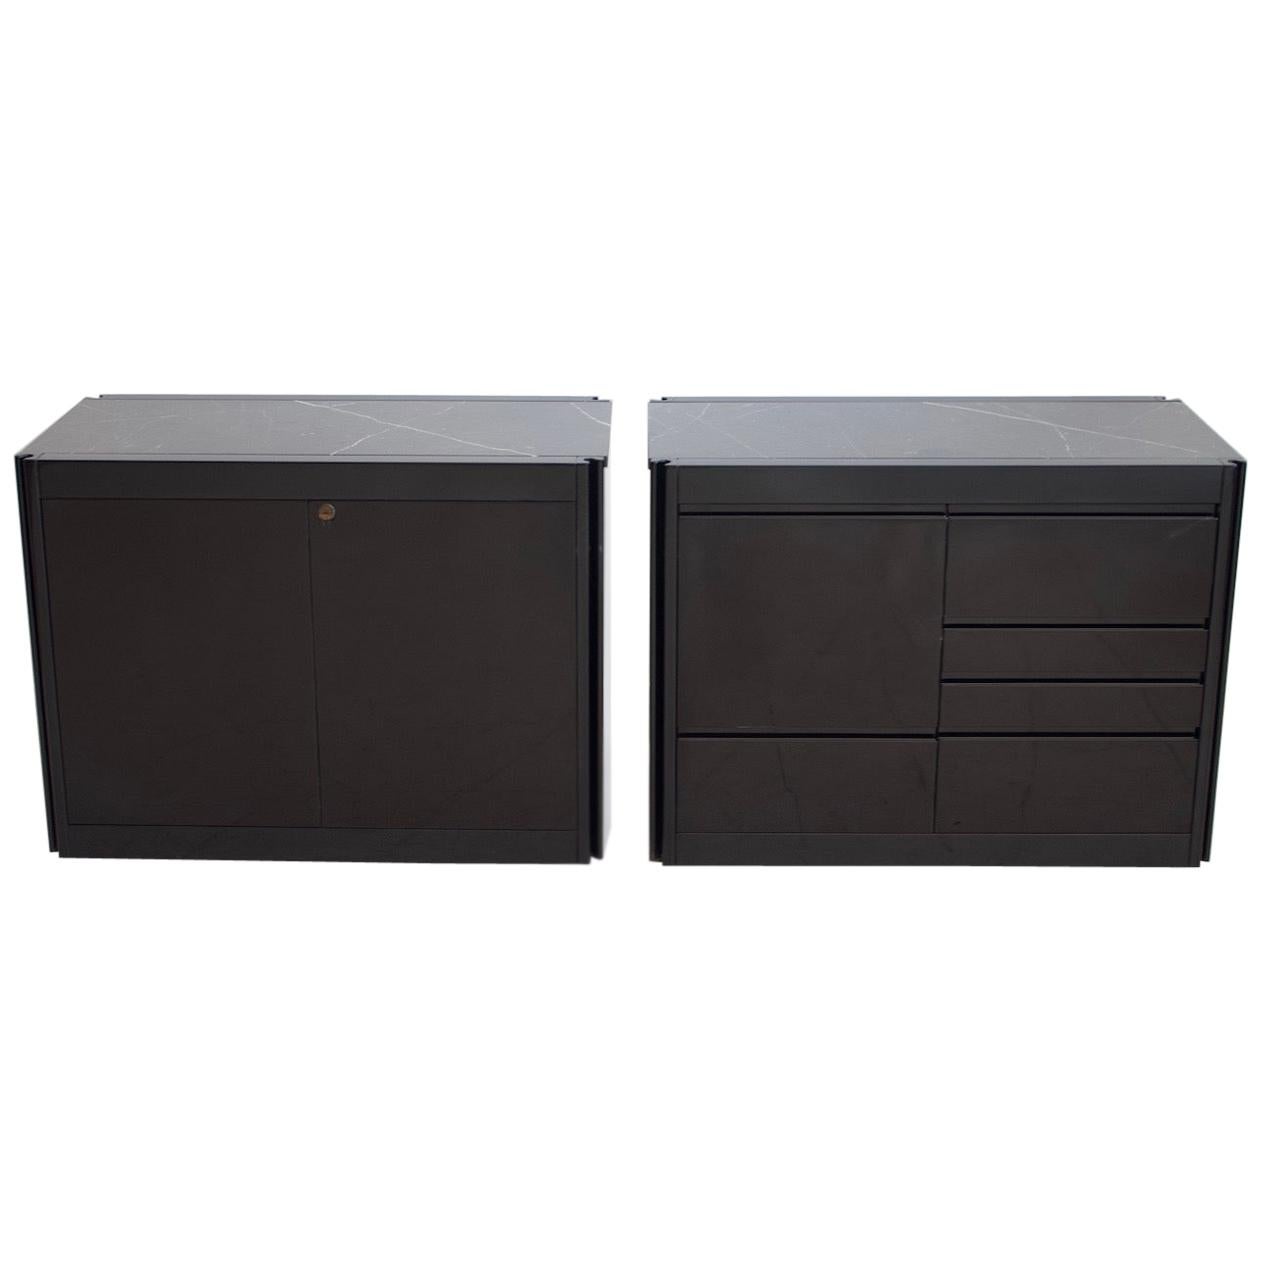 Pair of Black Credenzas with Marble Top by Angelo Mangiarotti